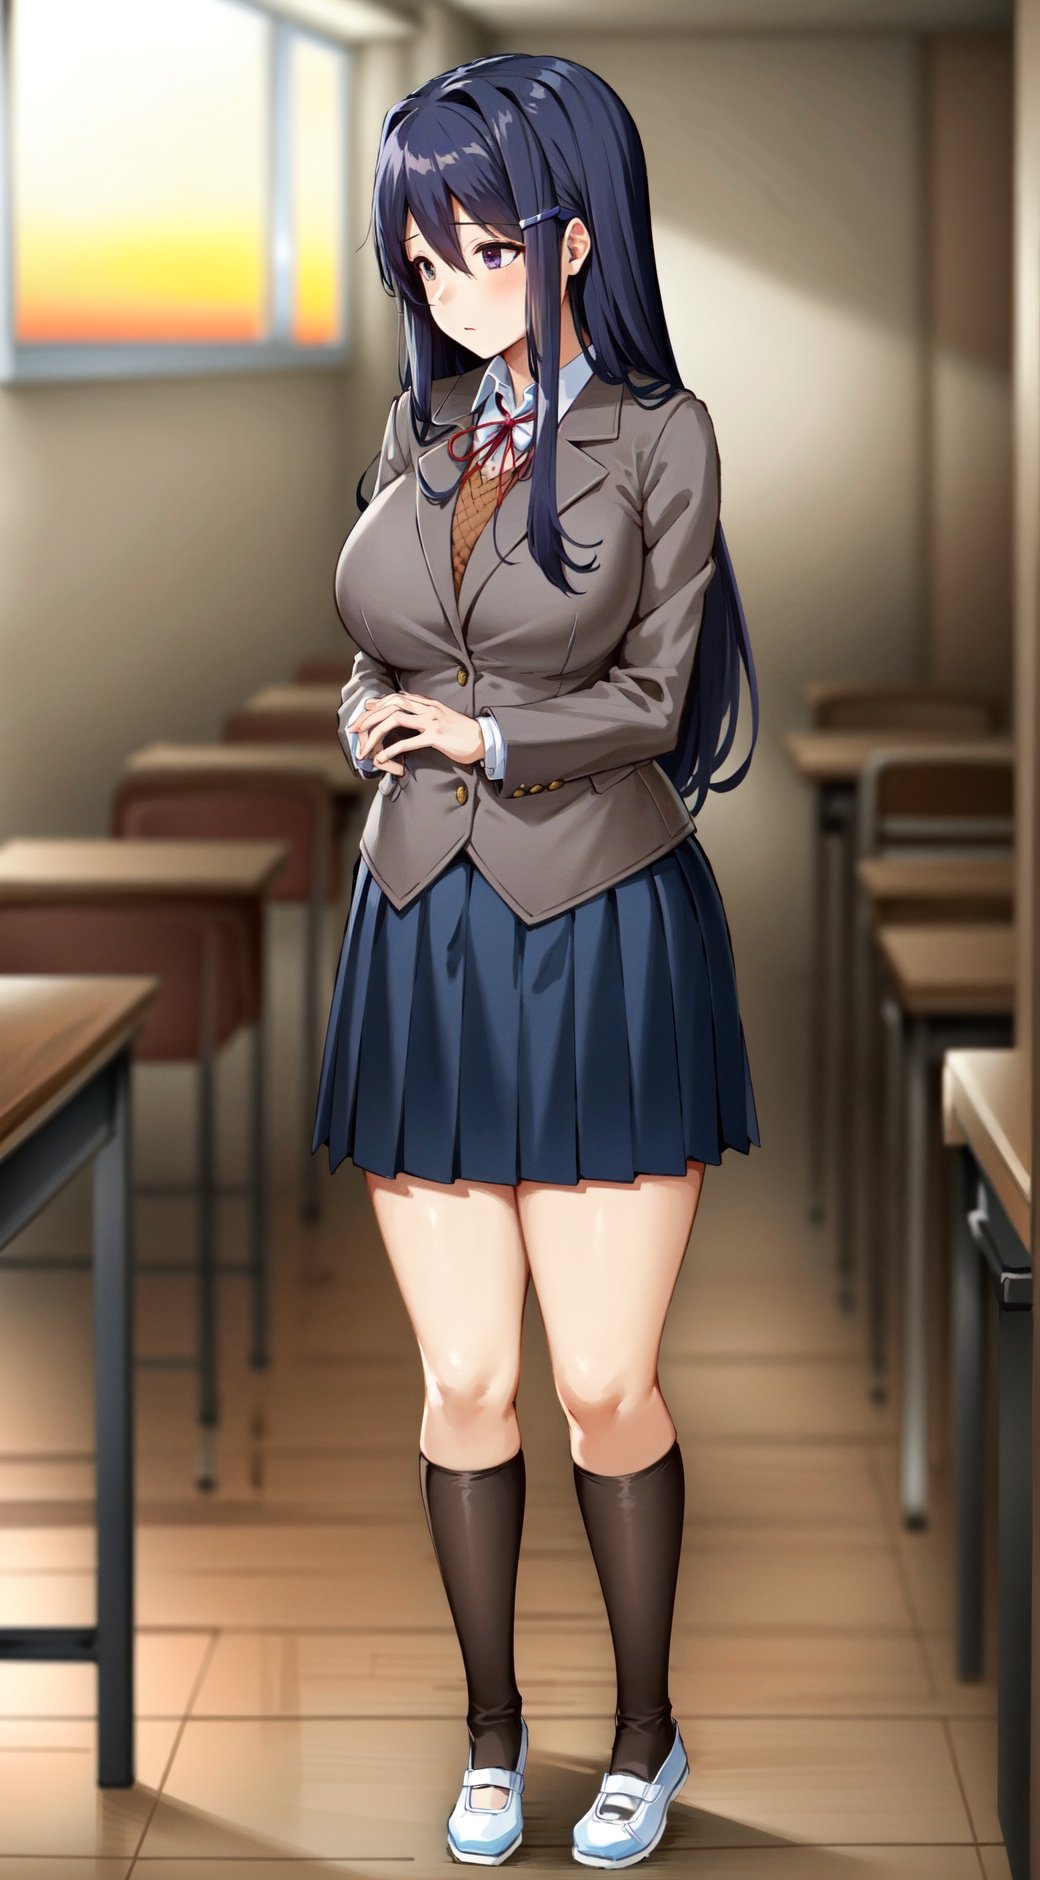 yuri, large breasts, pleated skirt, shy, looking away, grey jacket, in classroom, sunset, school_uniforms, uniforms, long skirt, full body, whole body, chubby, sexy, perfect hands